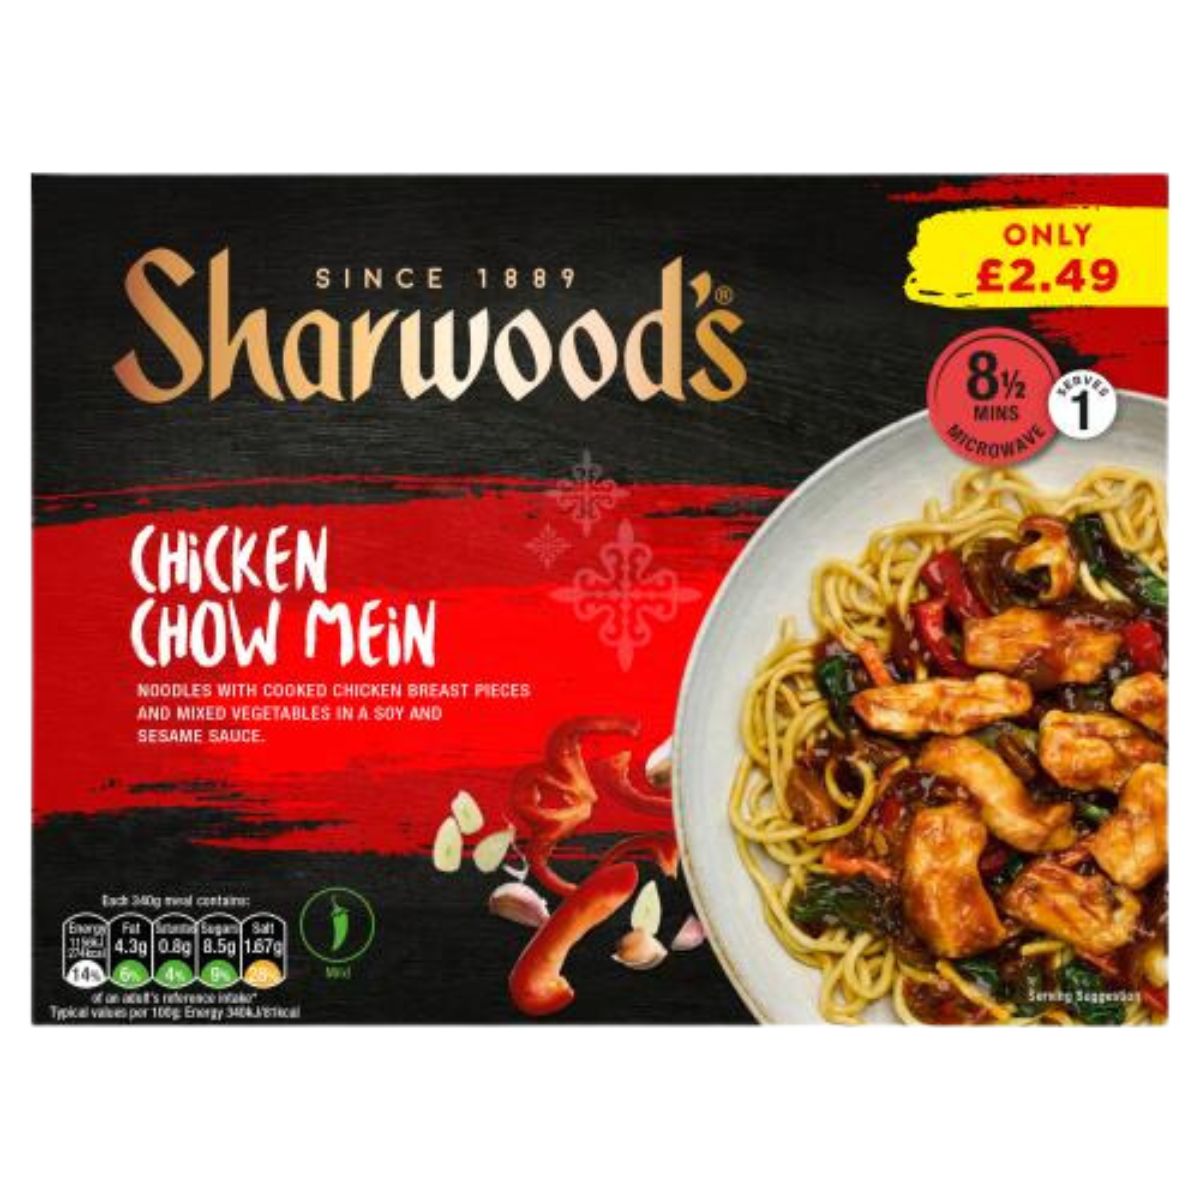 A box of Sharwoods - Chicken Chow Mein - 340g.